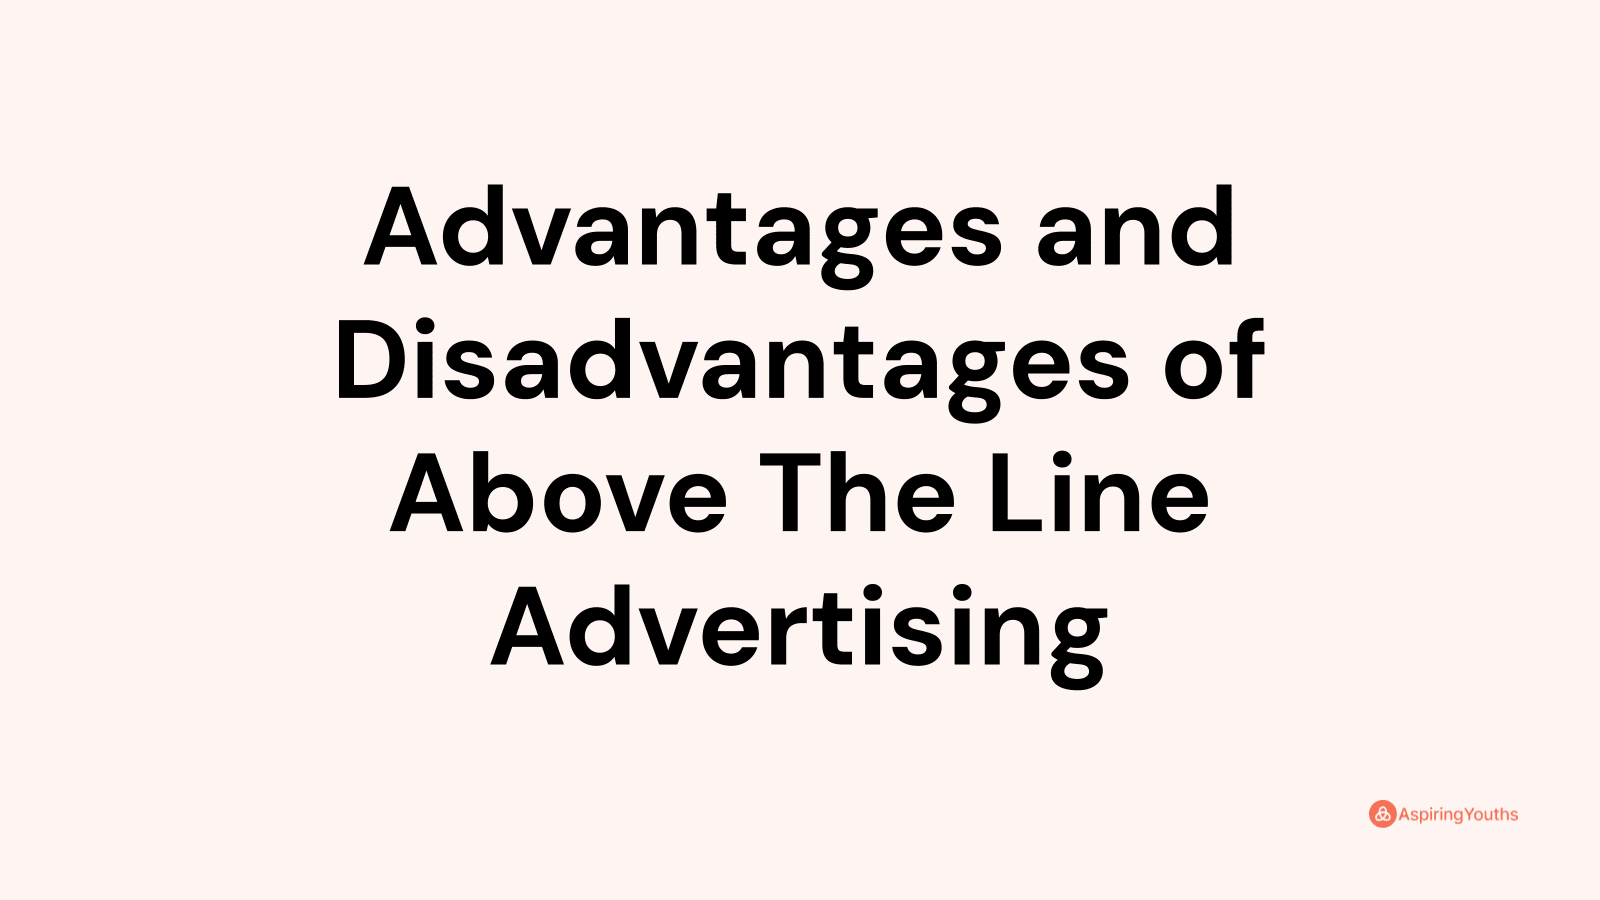 Advantages and disadvantages of Above The Line Advertising